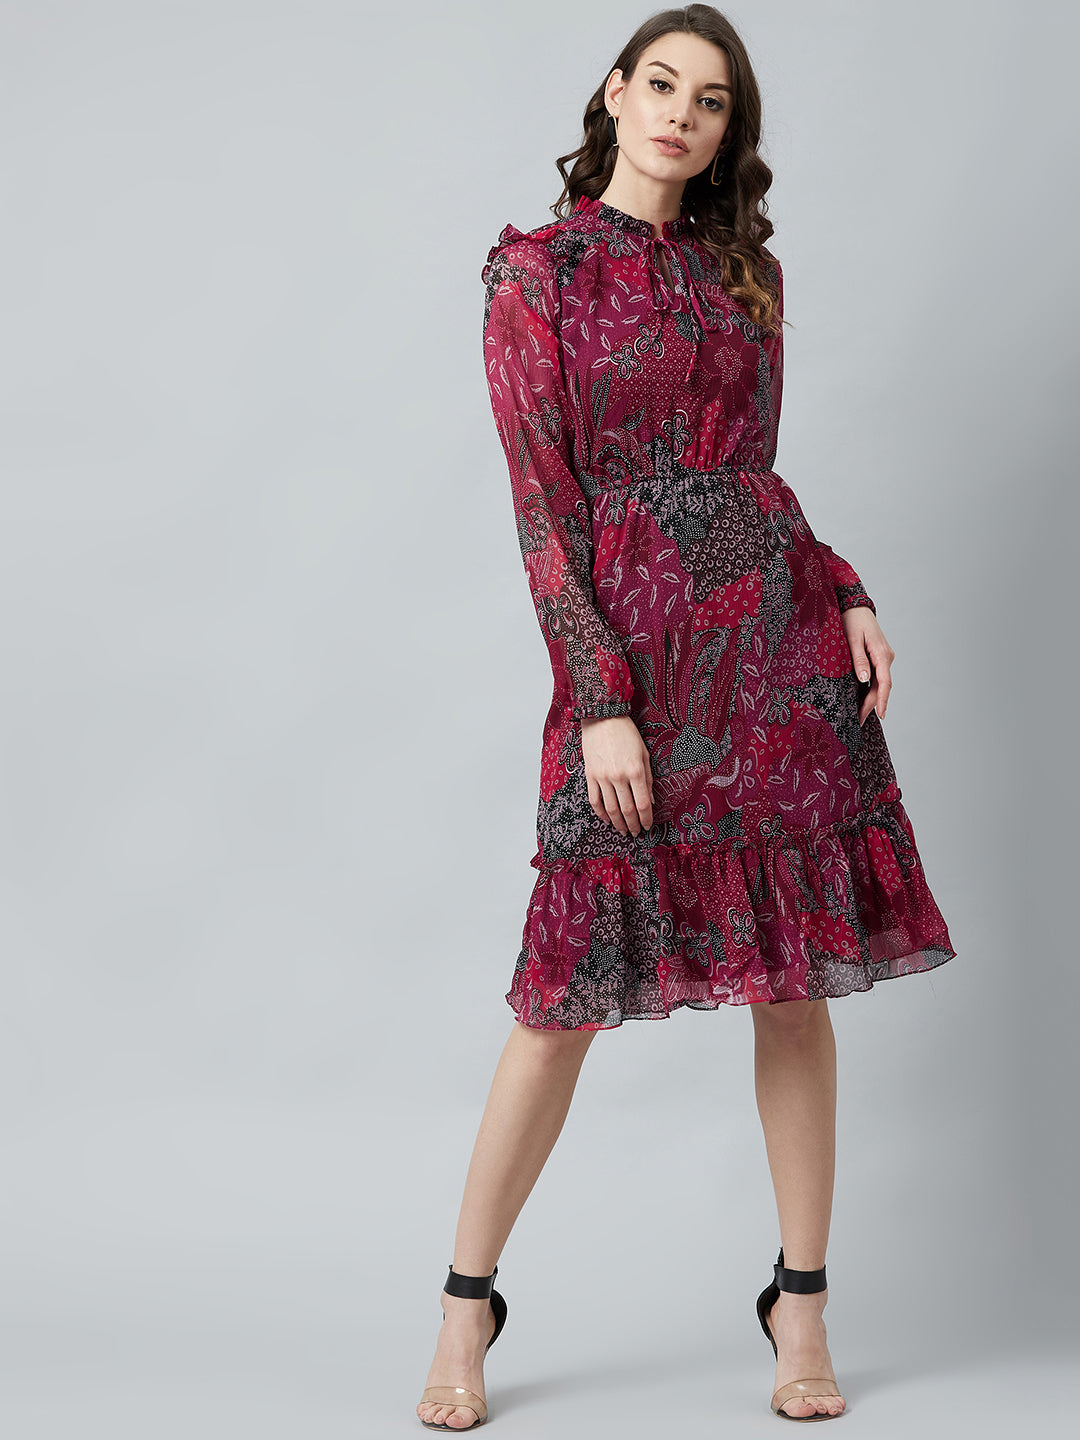 Athena Women Maroon Floral Printed Fit and Flare Dress - Athena Lifestyle